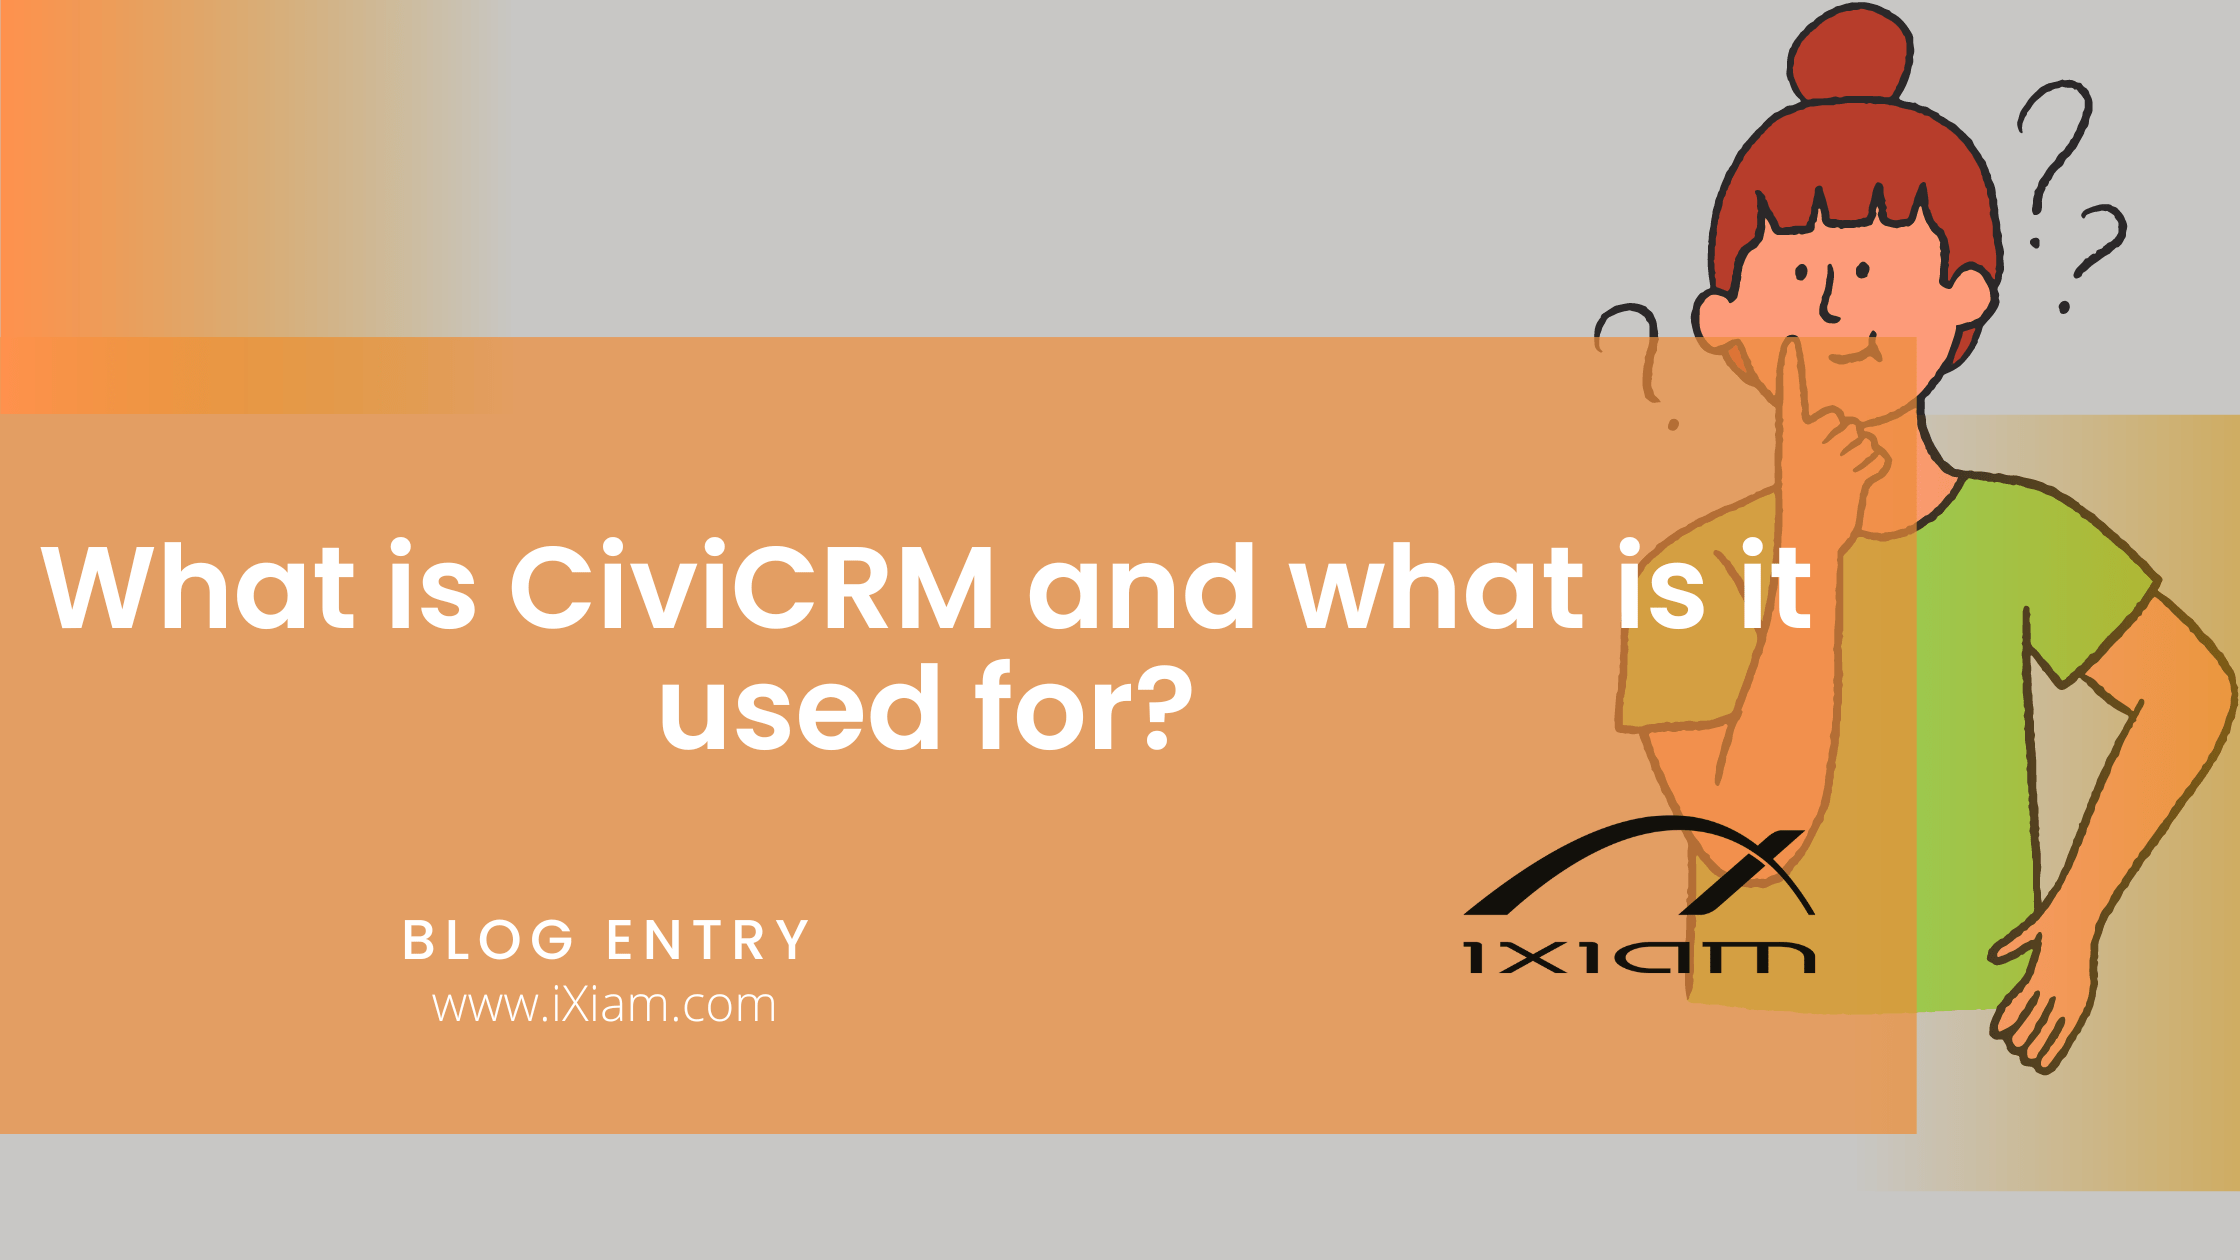 CiviCRM is a CRM that facilitates the management of Third Sector entities. Find out about it on the iXiam blog.